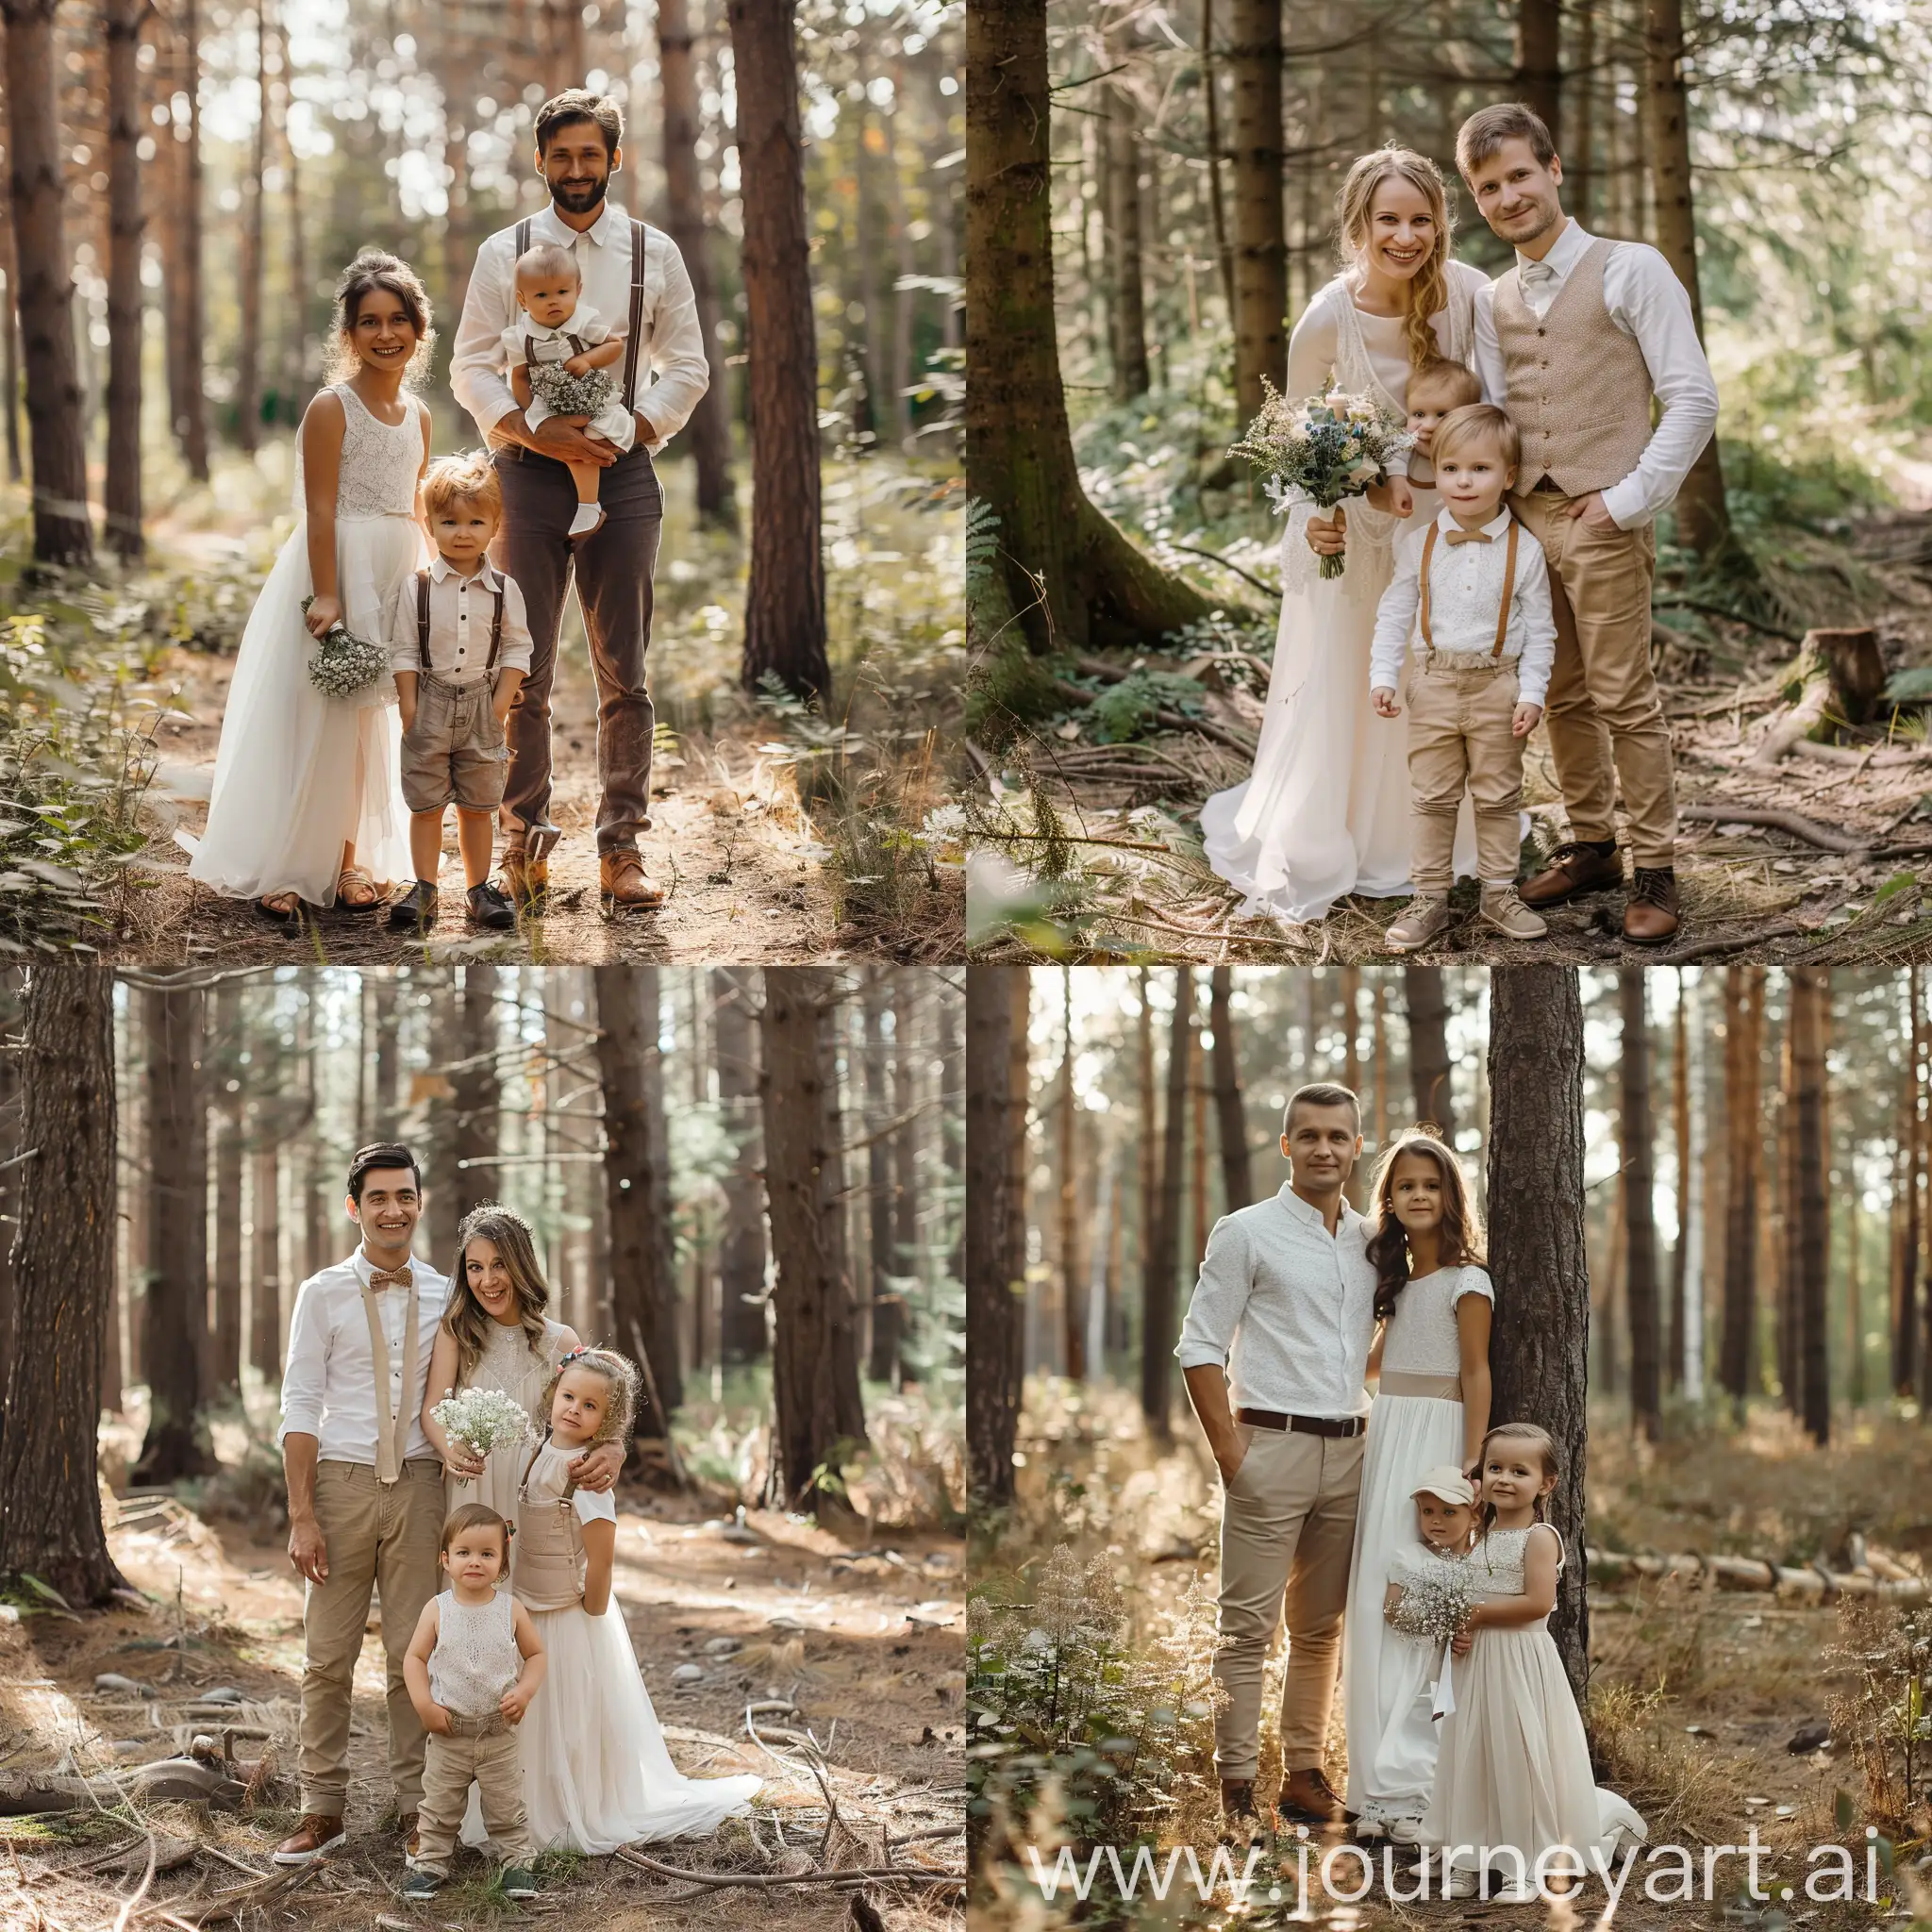 Family-PreWedding-Photoshoot-in-Enchanted-Forest